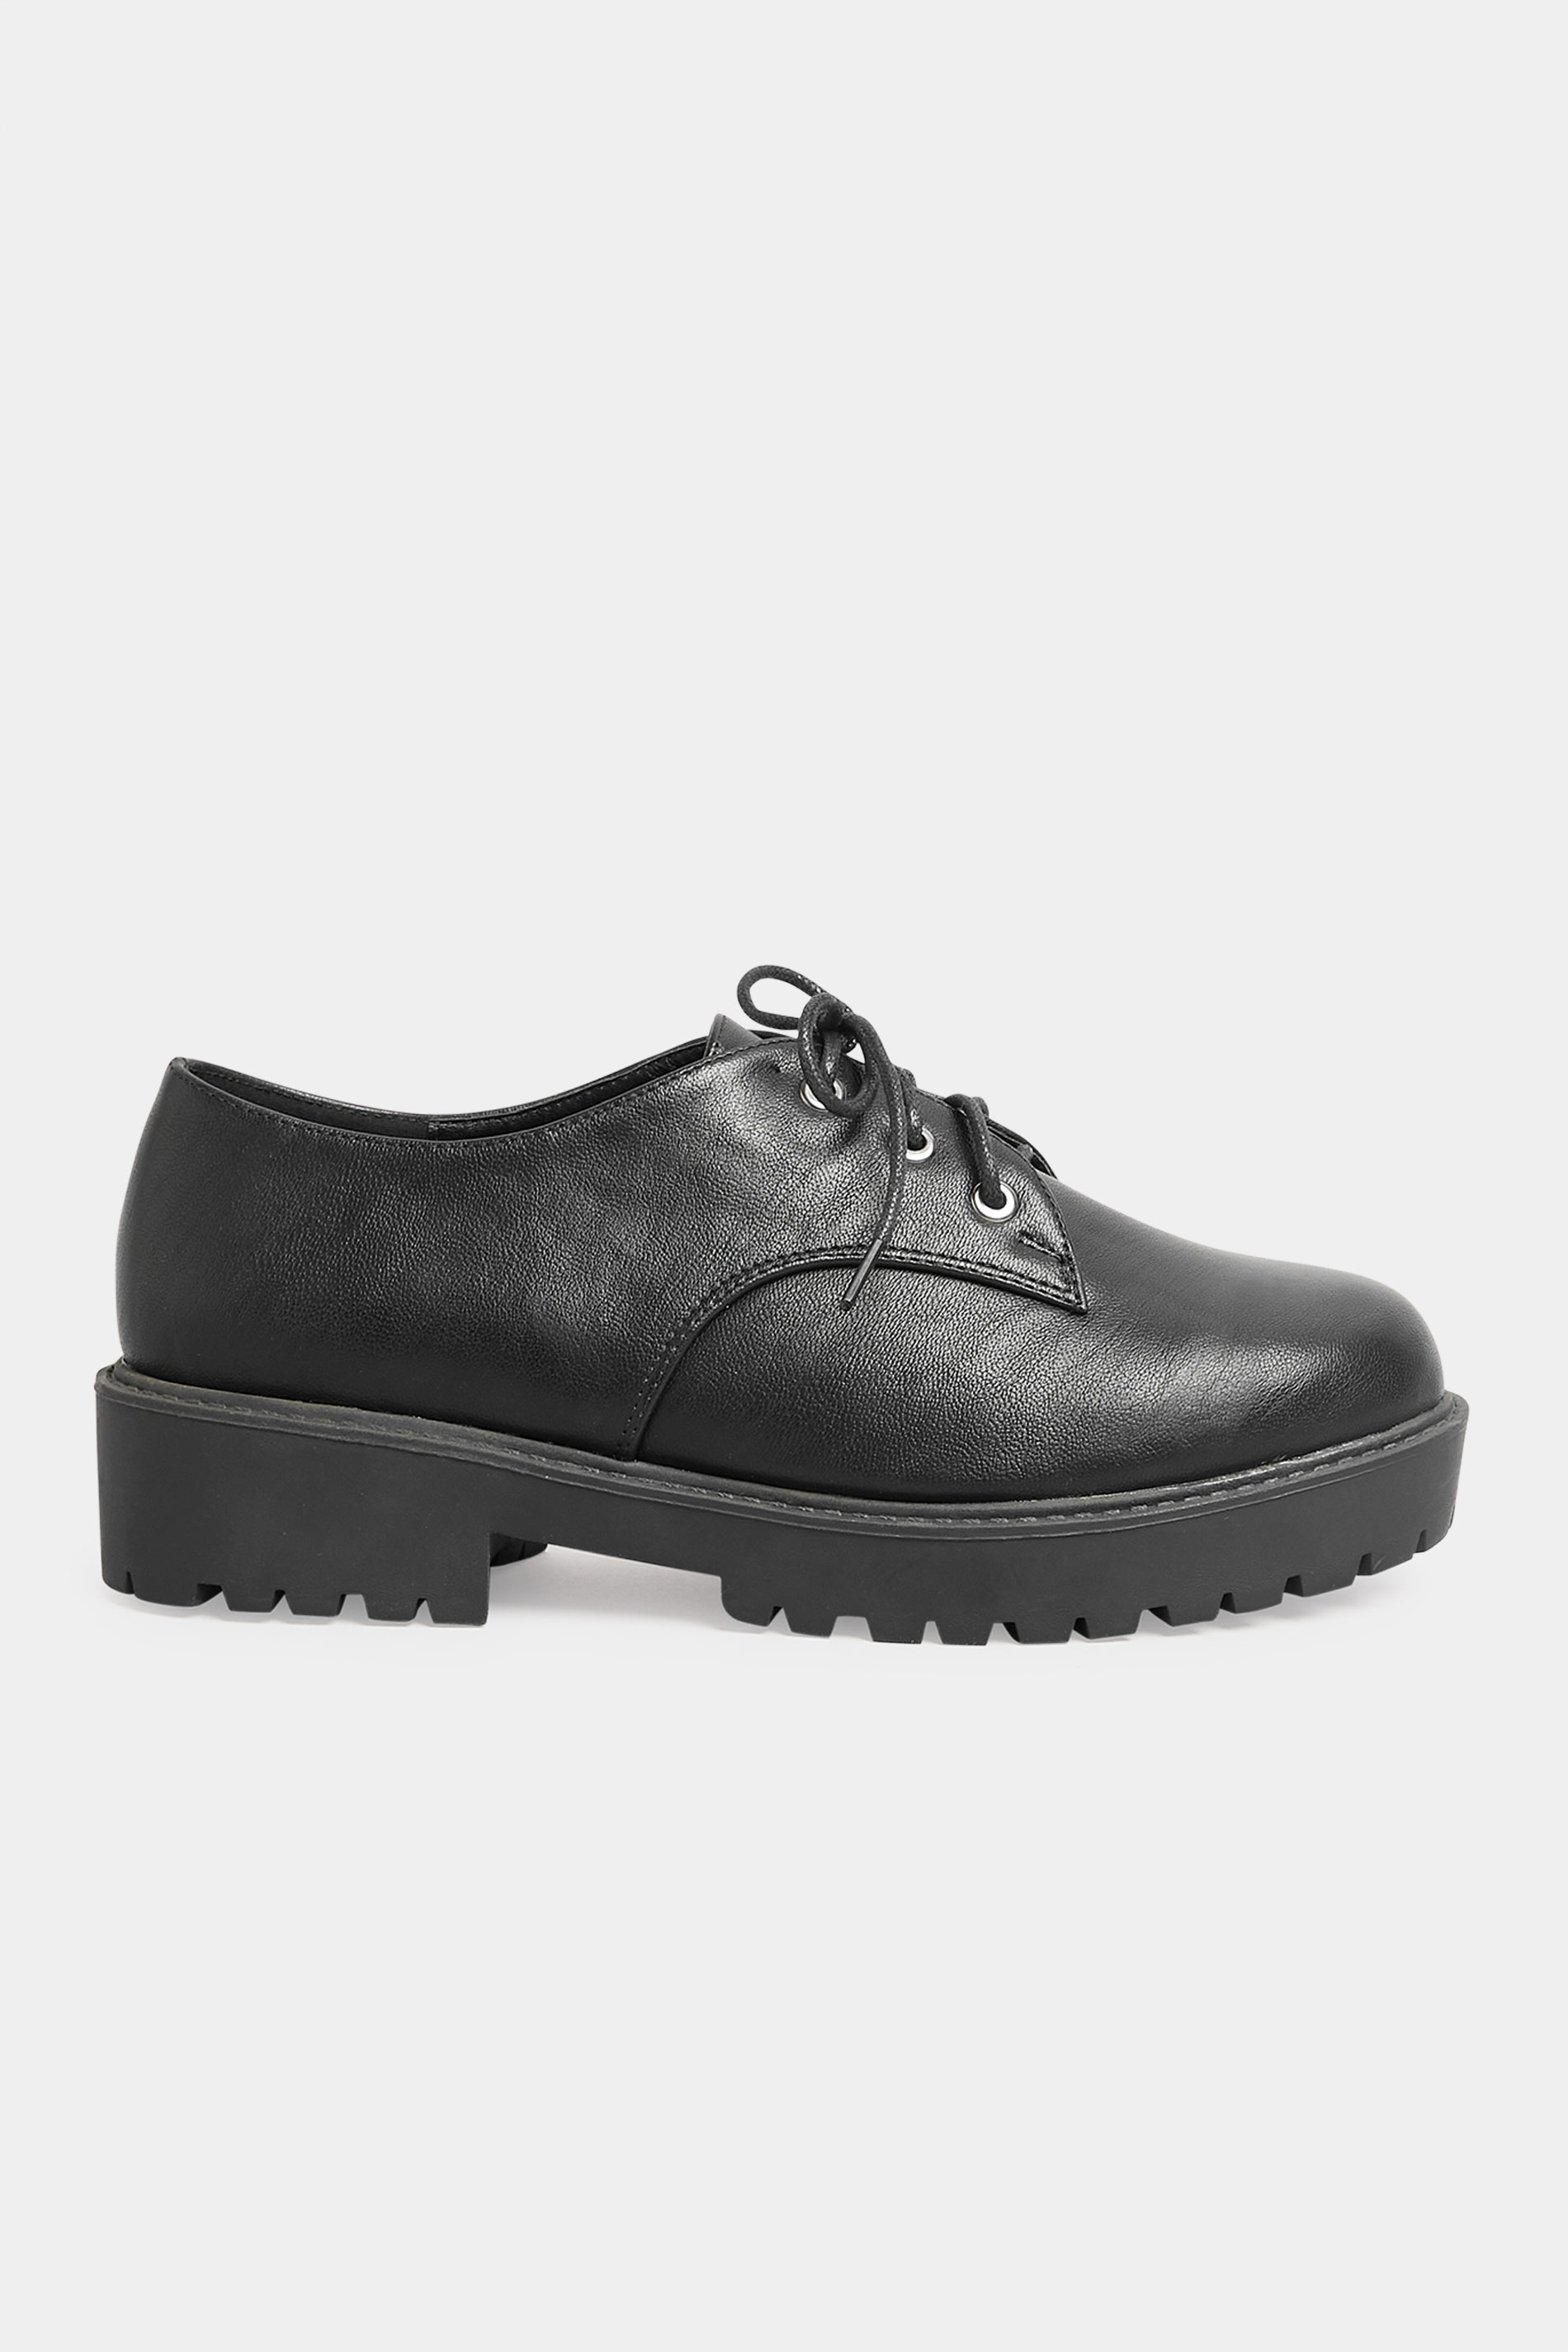 Black Chunky Lace Up Derby Shoes In Extra Wide EEE Fit | Long Tall Sally